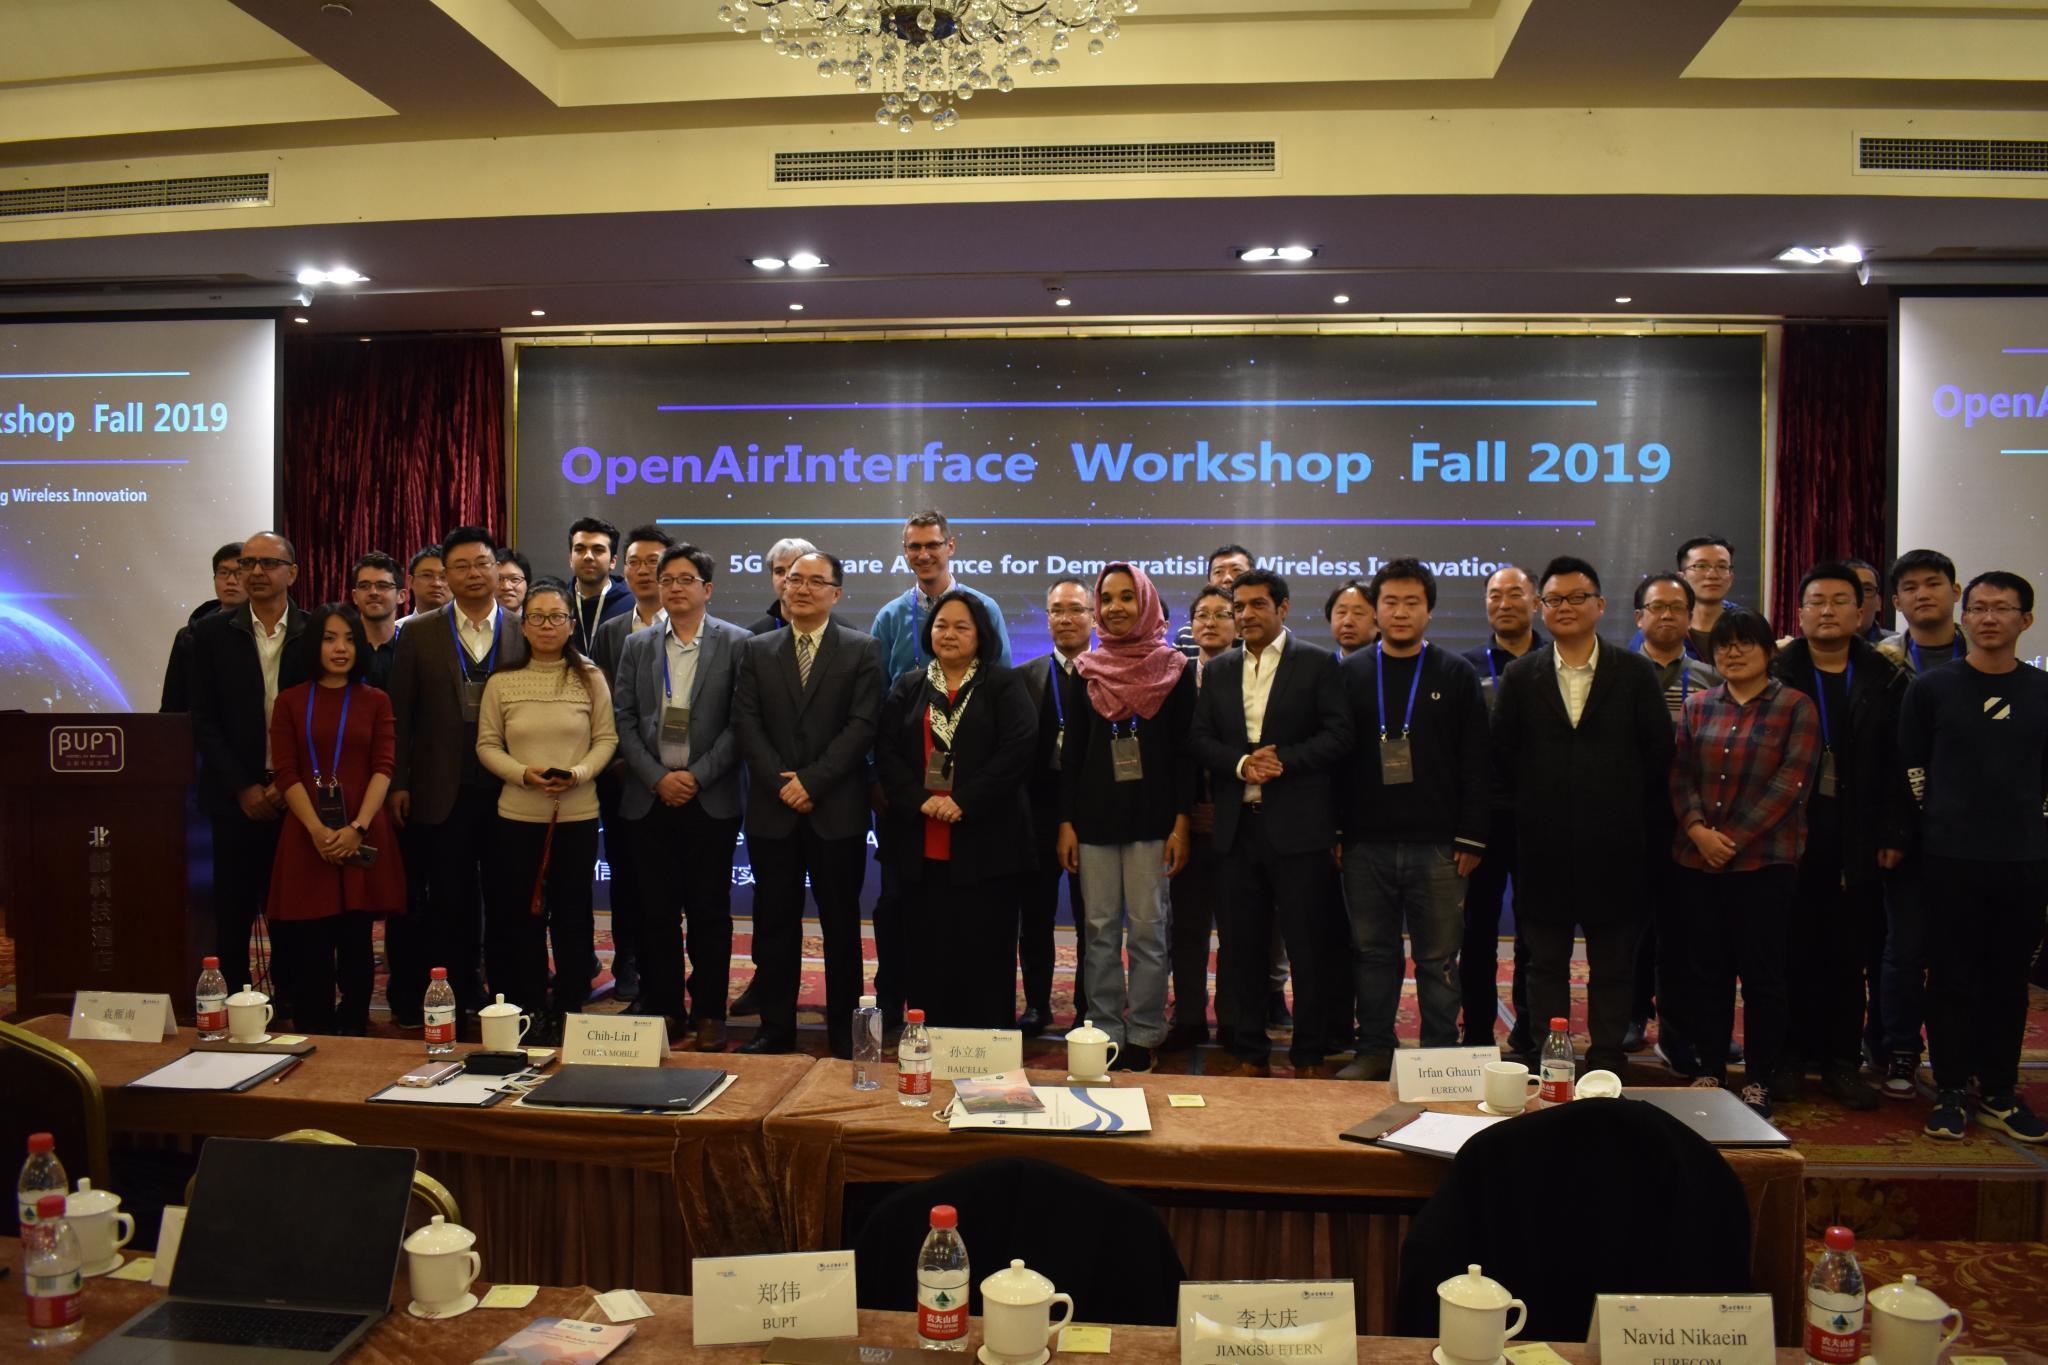 Vicomtech presents its FeMBMS 5G Broadcast contributions at the Symposium organized by the OpenAirInterface Software Alliance in Beijing